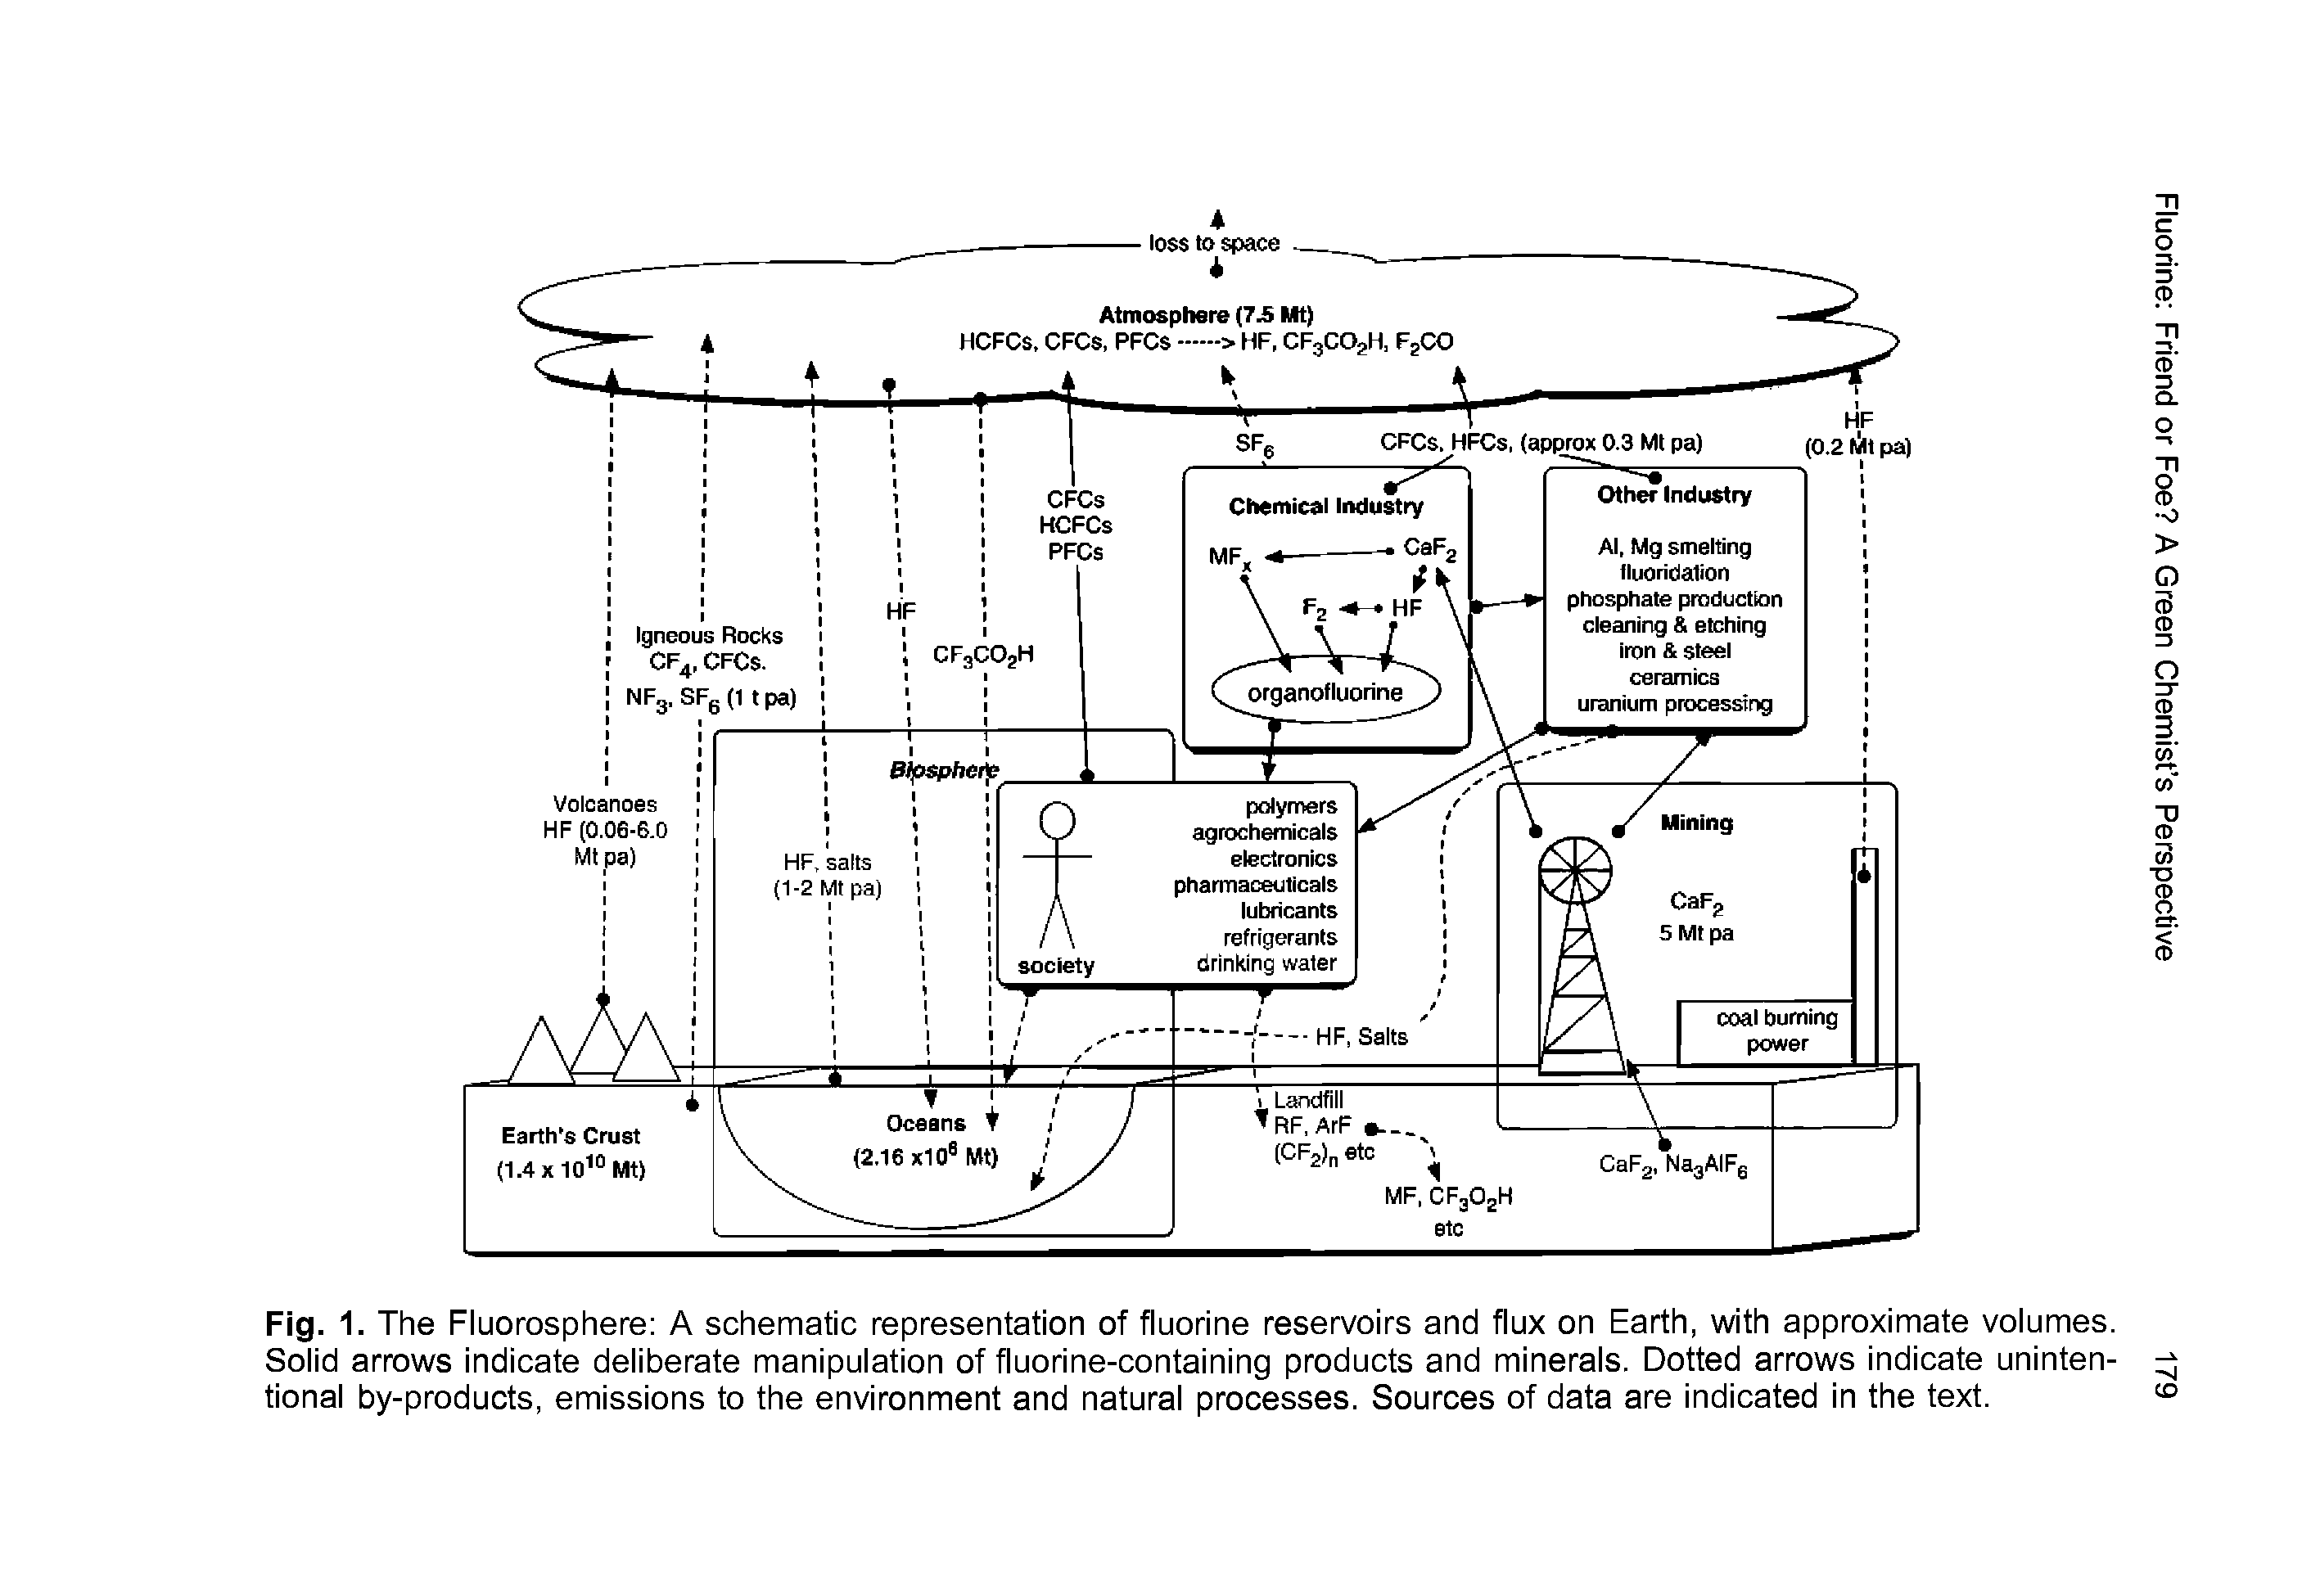 Fig. 1. The Fluorosphere A schematic representation of fluorine reservoirs and flux on Earth, with approximate volumes. Solid arrows indicate deliberate manipulation of fluorine-containing products and minerals. Dotted arrows indicate unintentional by-products, emissions to the environment and natural processes. Sources of data are indicated in the text.